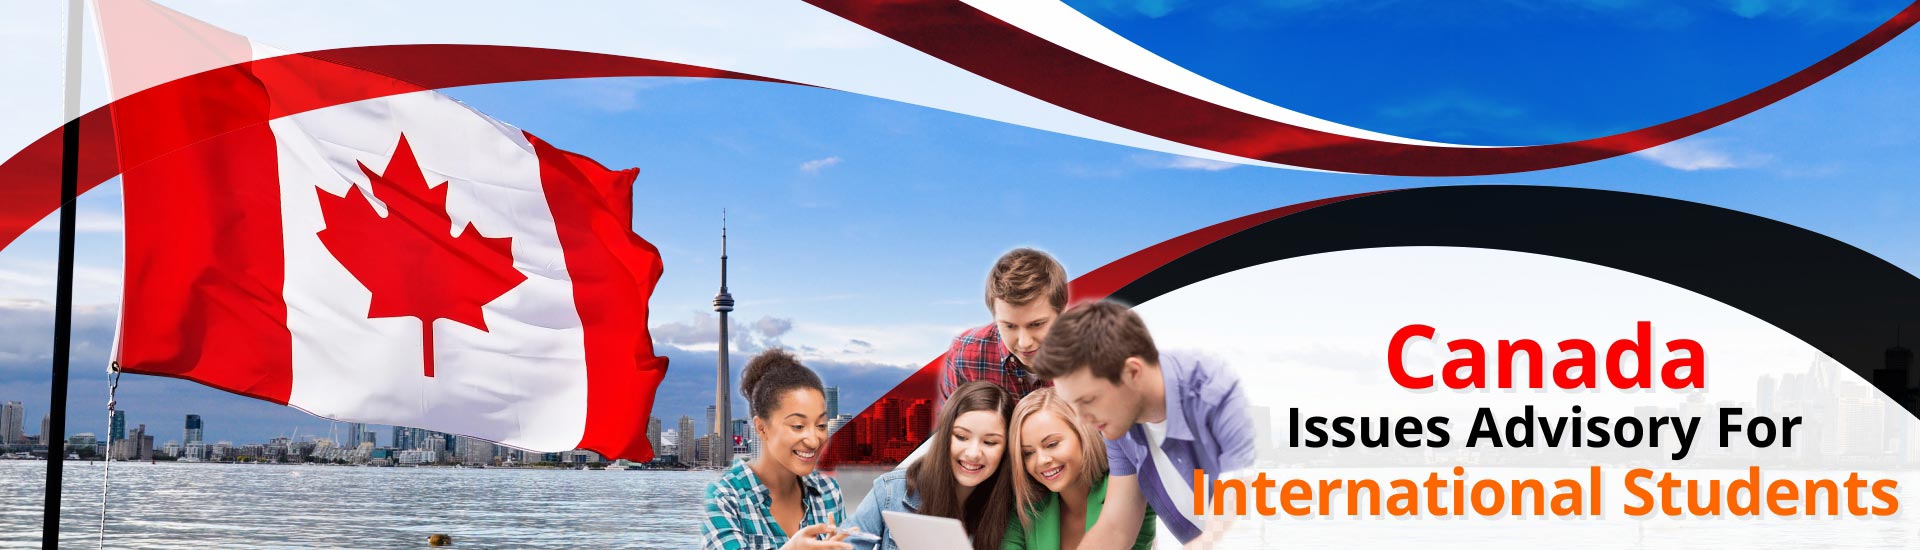 Canada issues advisory for international students